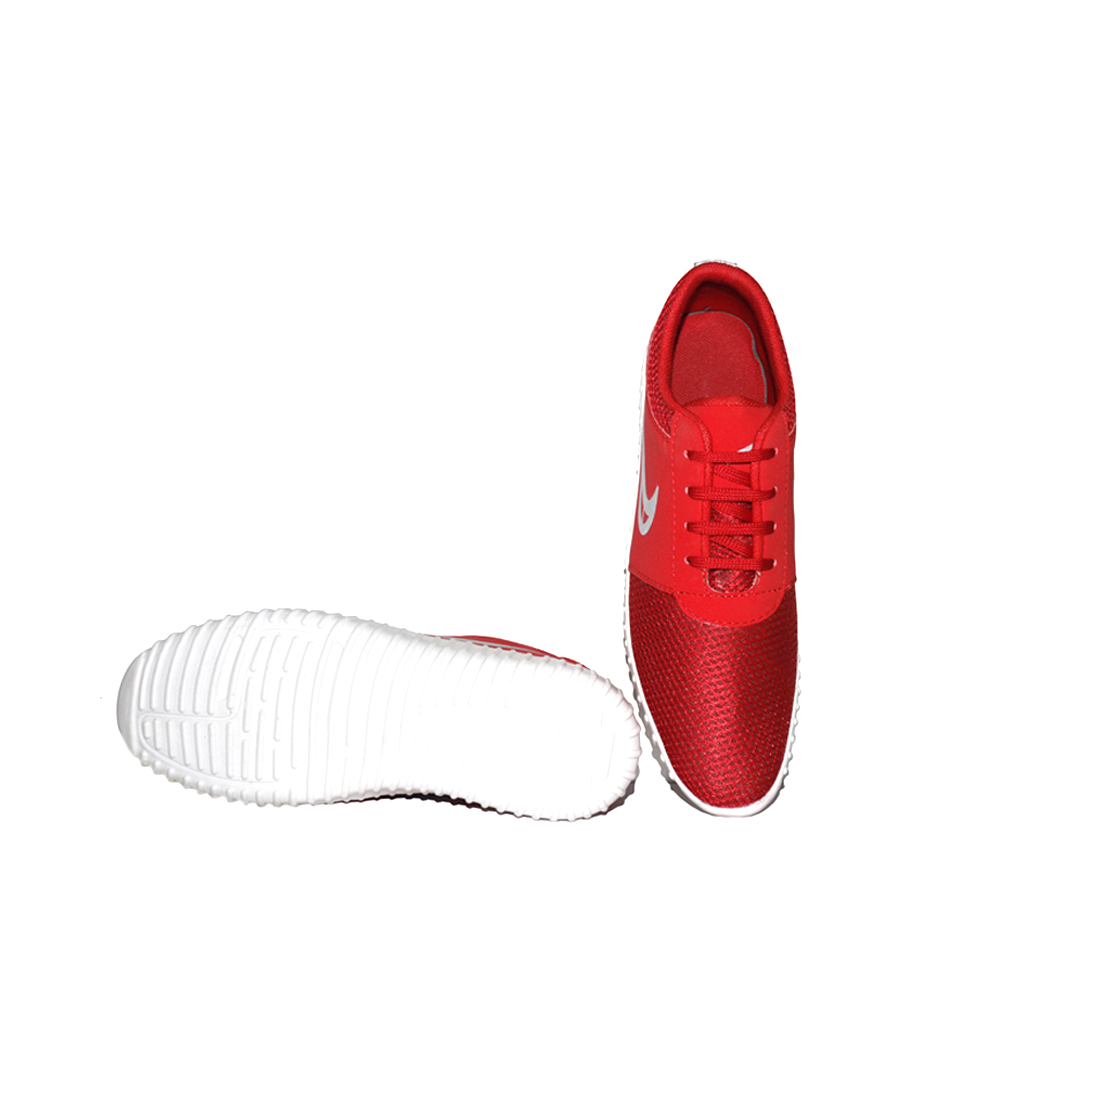 Buy Xylus New Designer N-Red Casual Sports Shoes For Mens and Boys ...